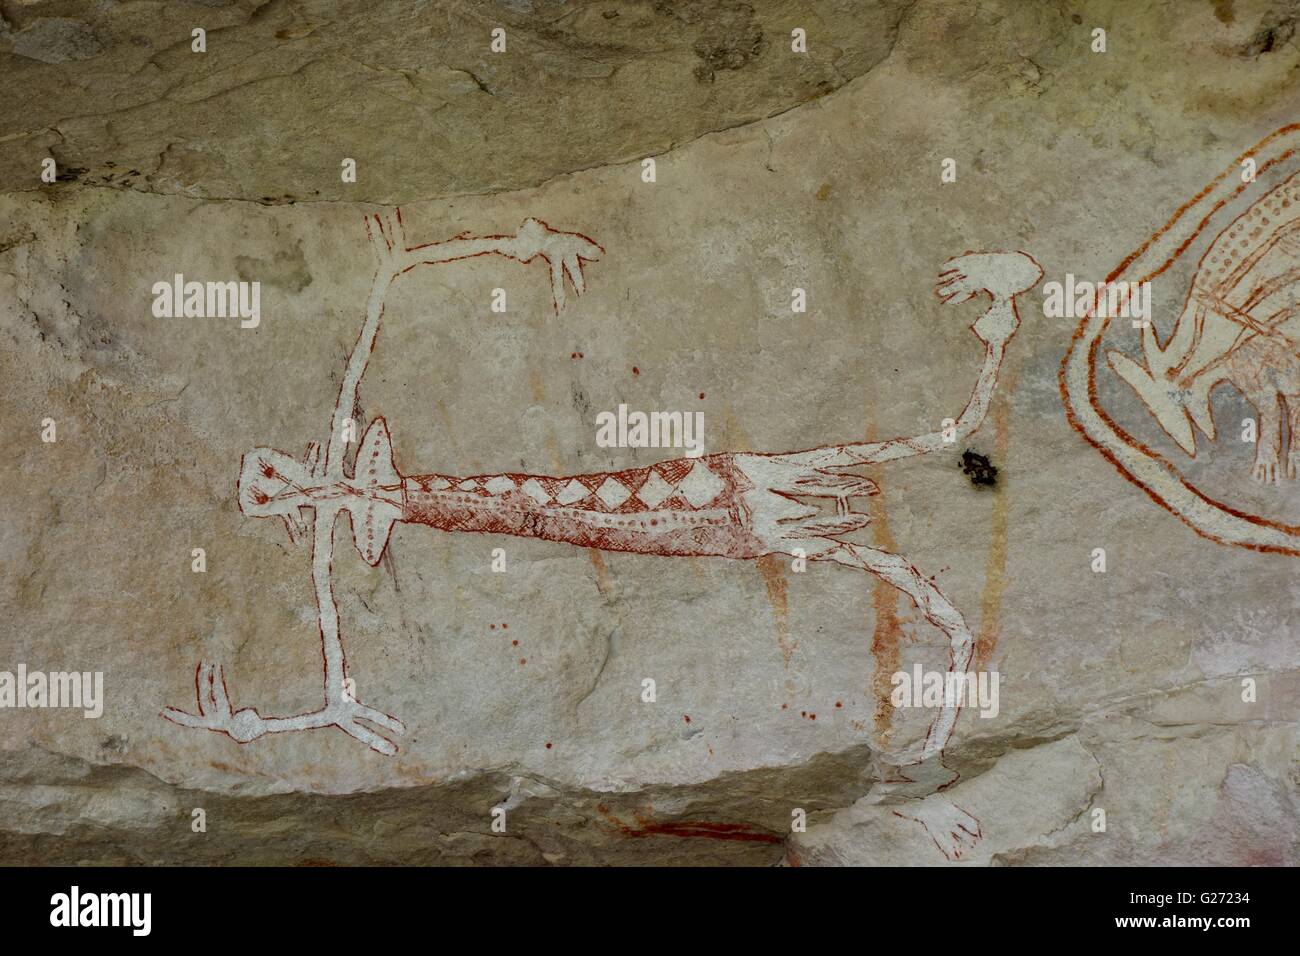 Ancient Aboriginal cave paintings known as 'rock art' found at Mount Borradaile, West Arnhem Land, Northern Territory, Australia Stock Photo